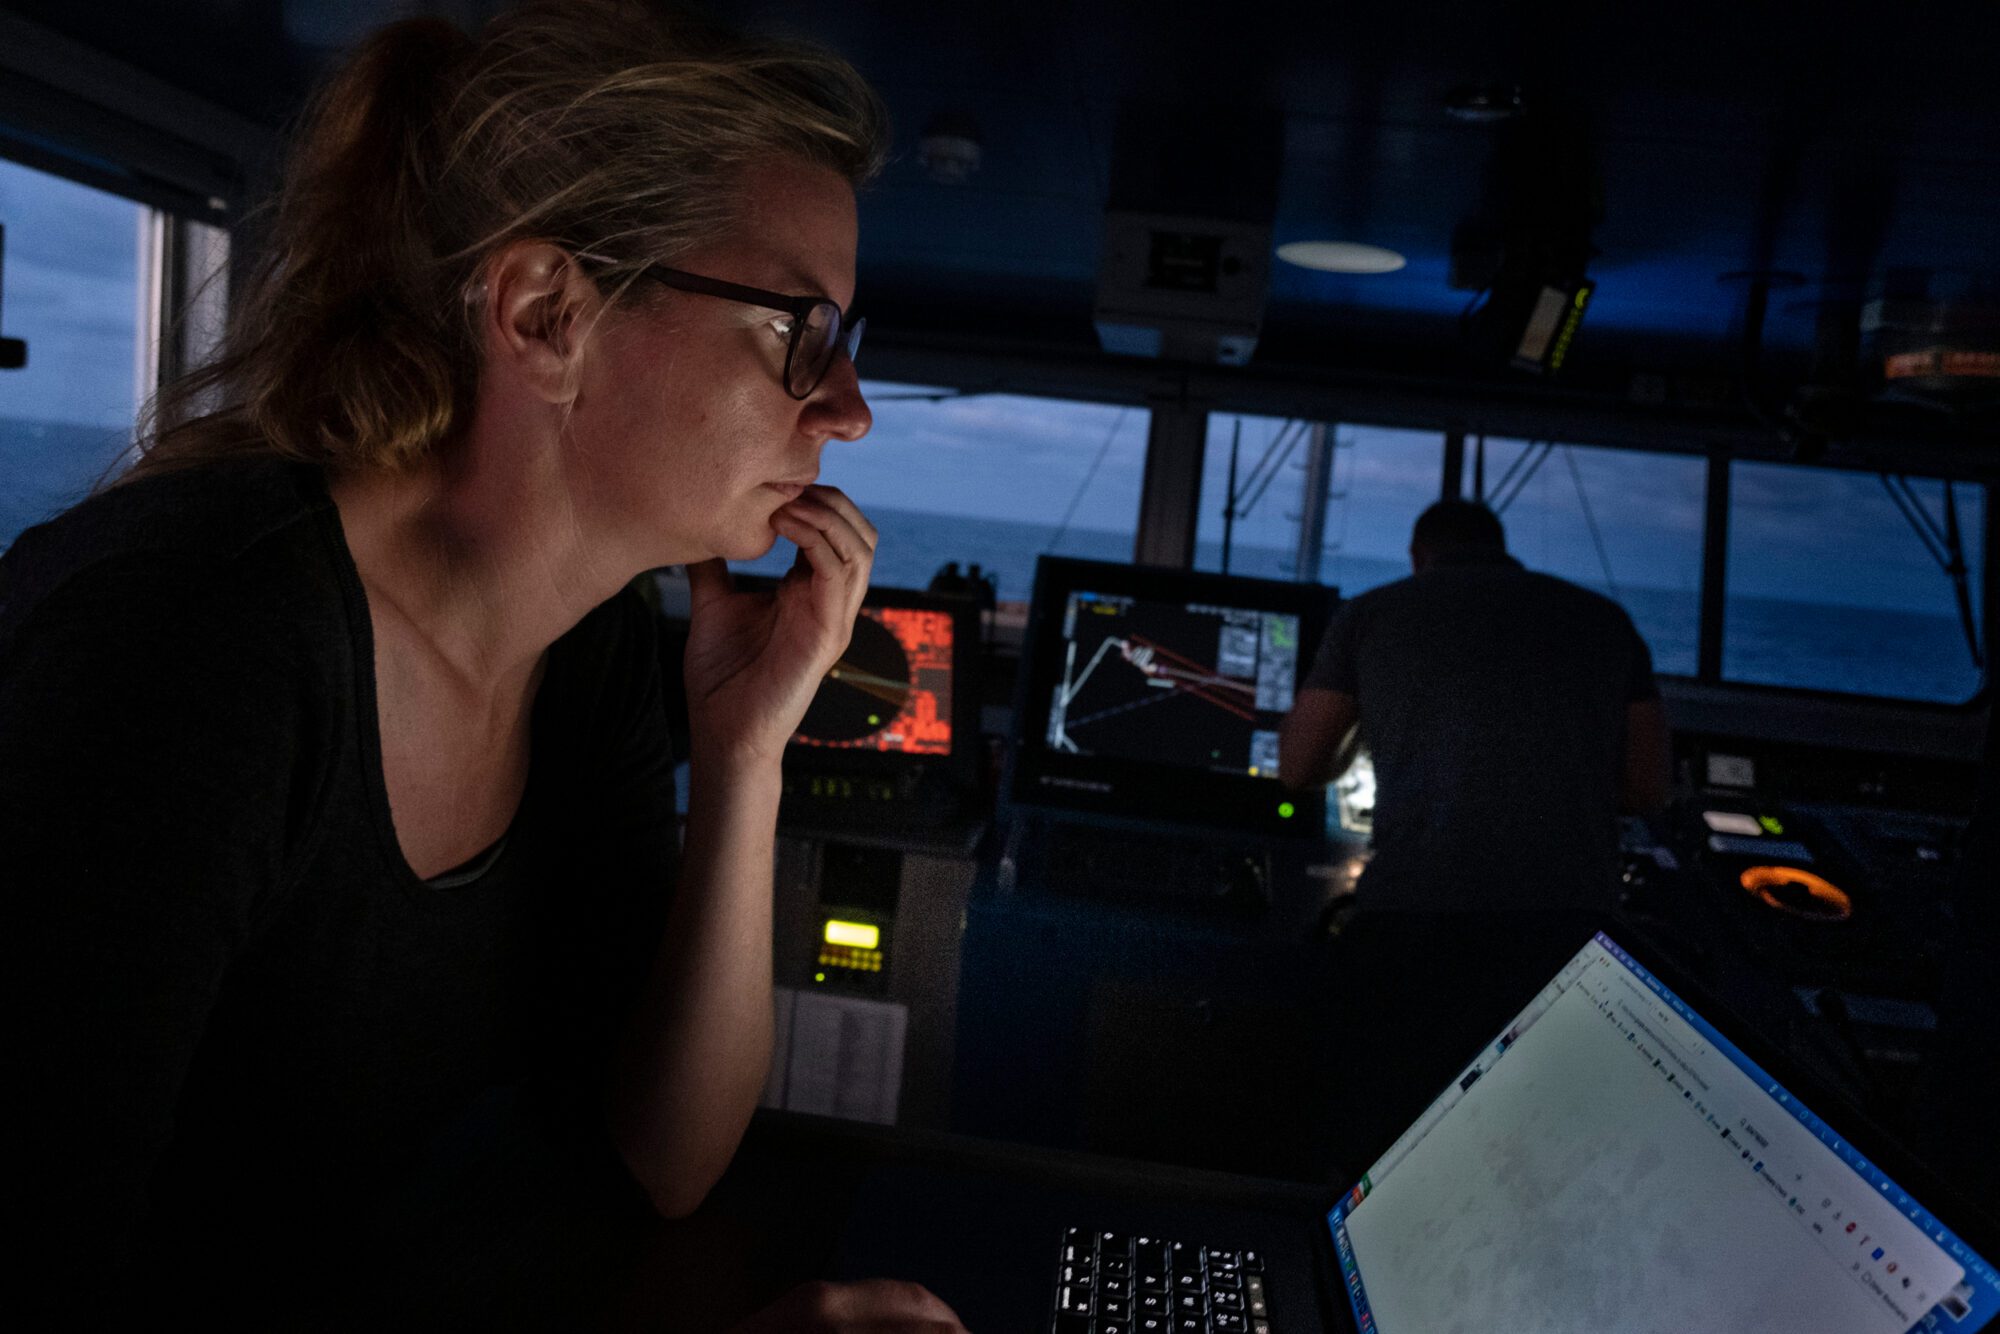 Standing on the darkened bridge of a ship, Sophie Cooke's face is illuminated by the radar screen she's examining.